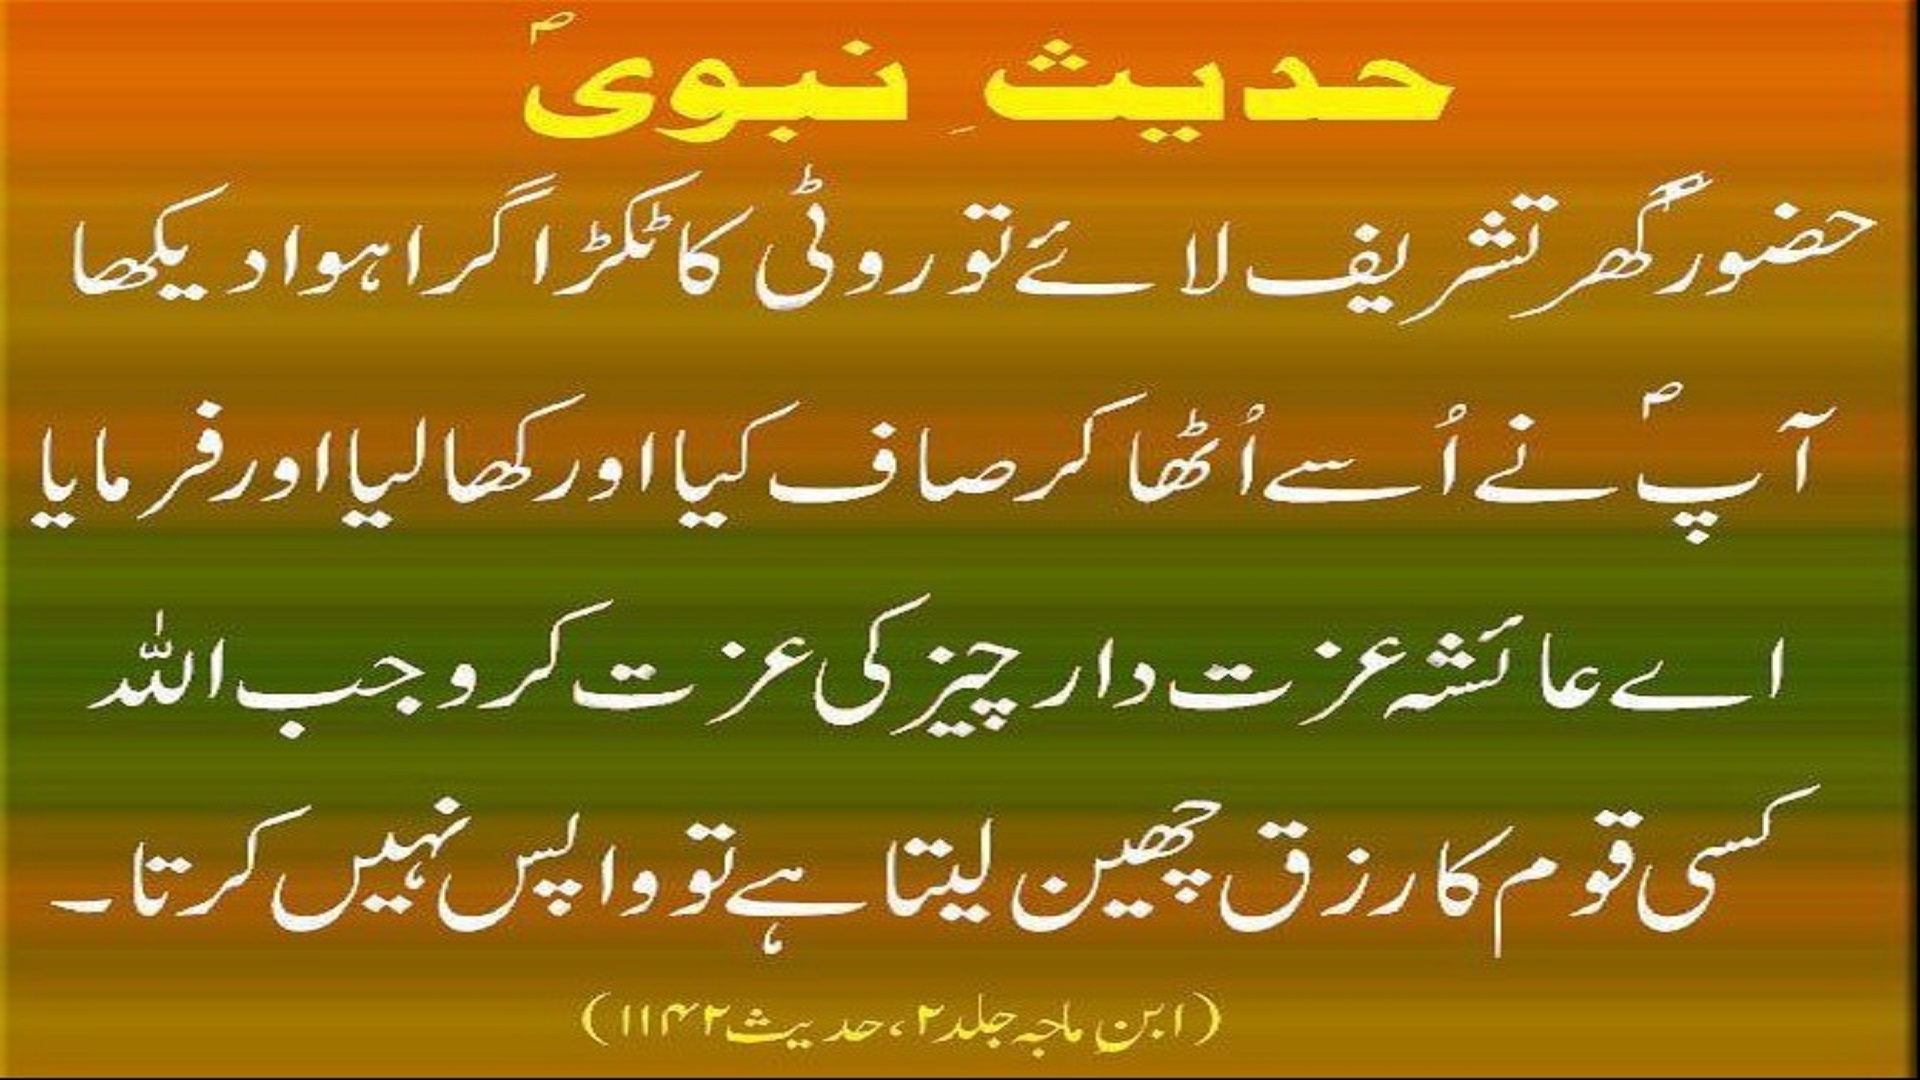 Hadees Abour Rizq Quotes Importance Of In Islam HD